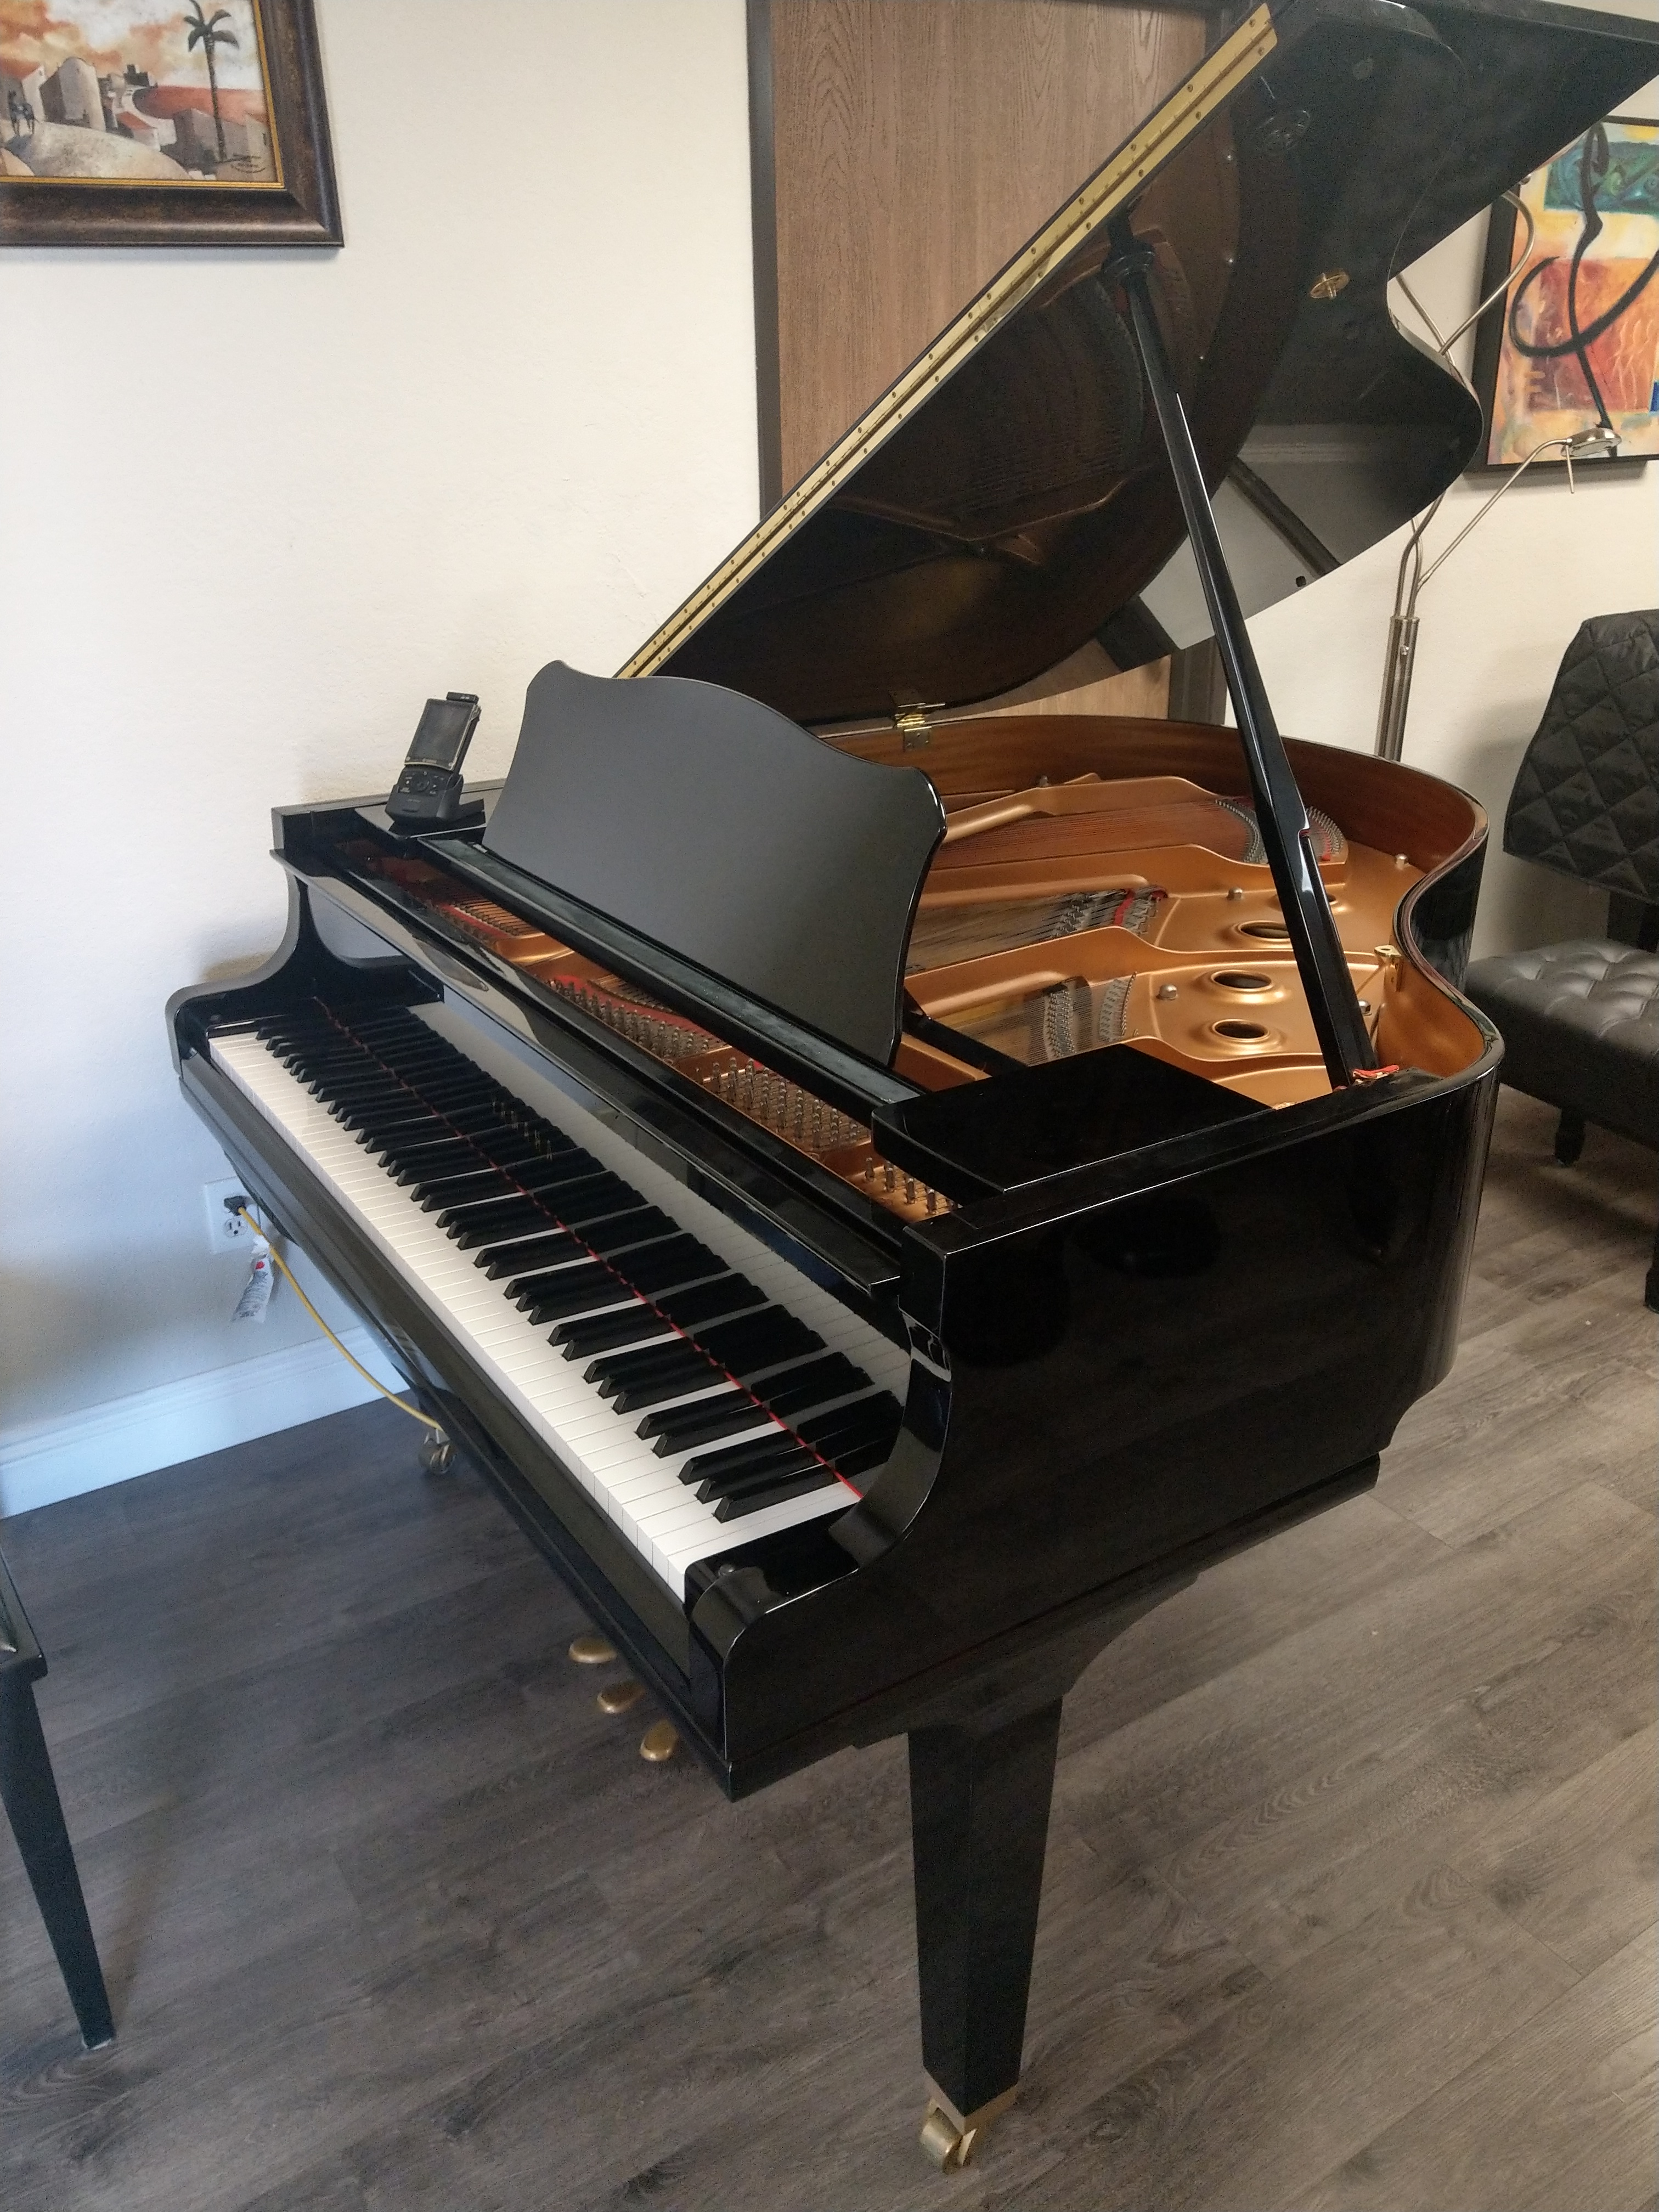 Deviate Pouch window Yamaha Disklavier Pianos For Sale | Like-New & Gently Used